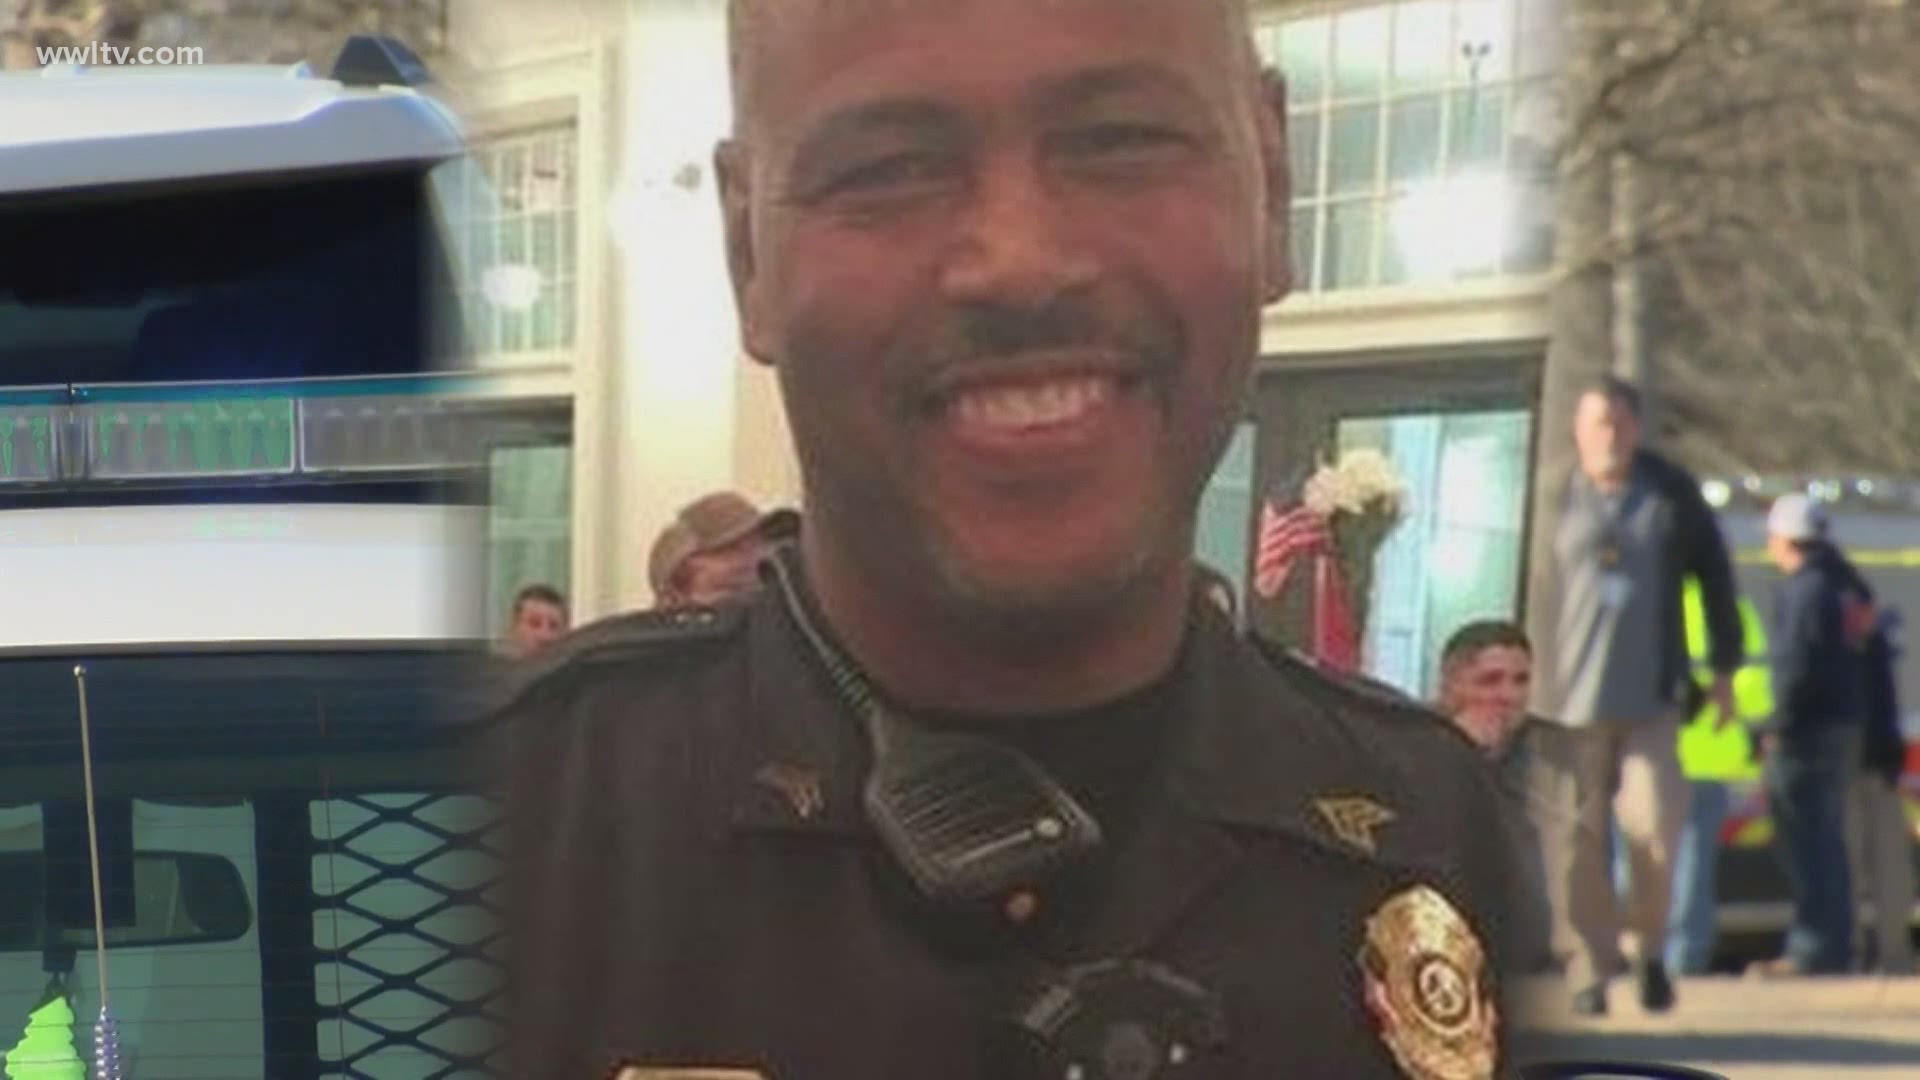 Hancock County is in shock after the shooting death of Lieutenant Michael Boutte, who was killed while responding to a disturbance call at a home, Monday.